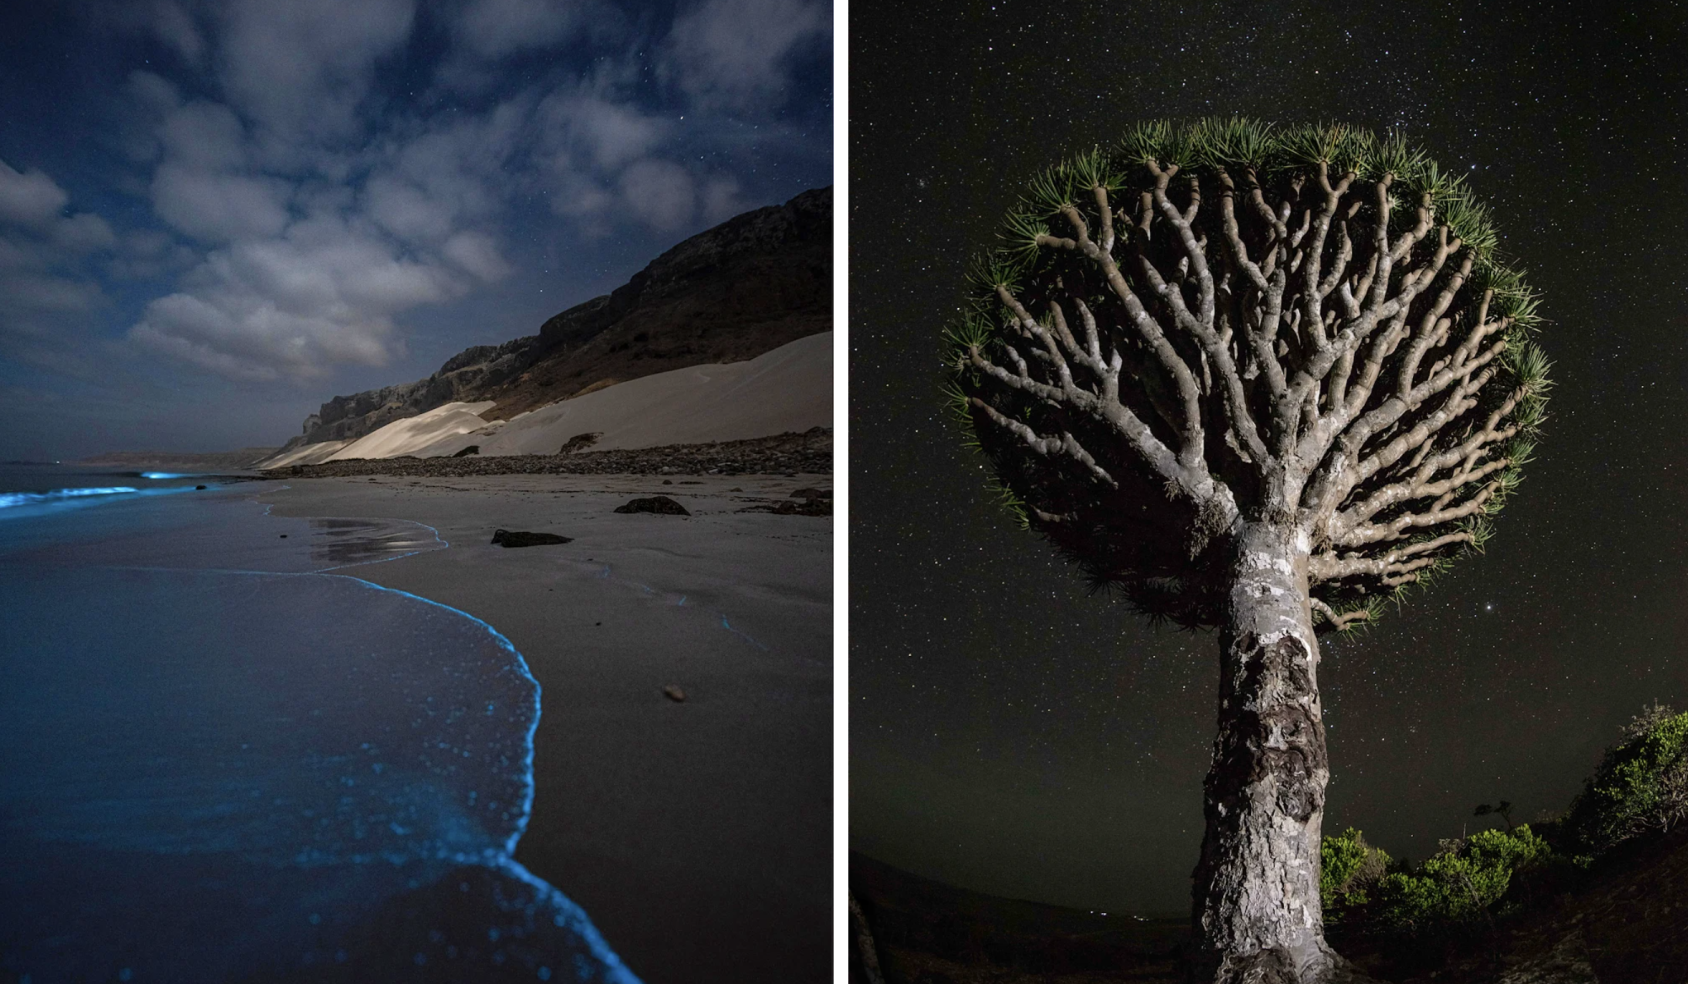 Nighttime shots of a beach and a tree against the starry sky.